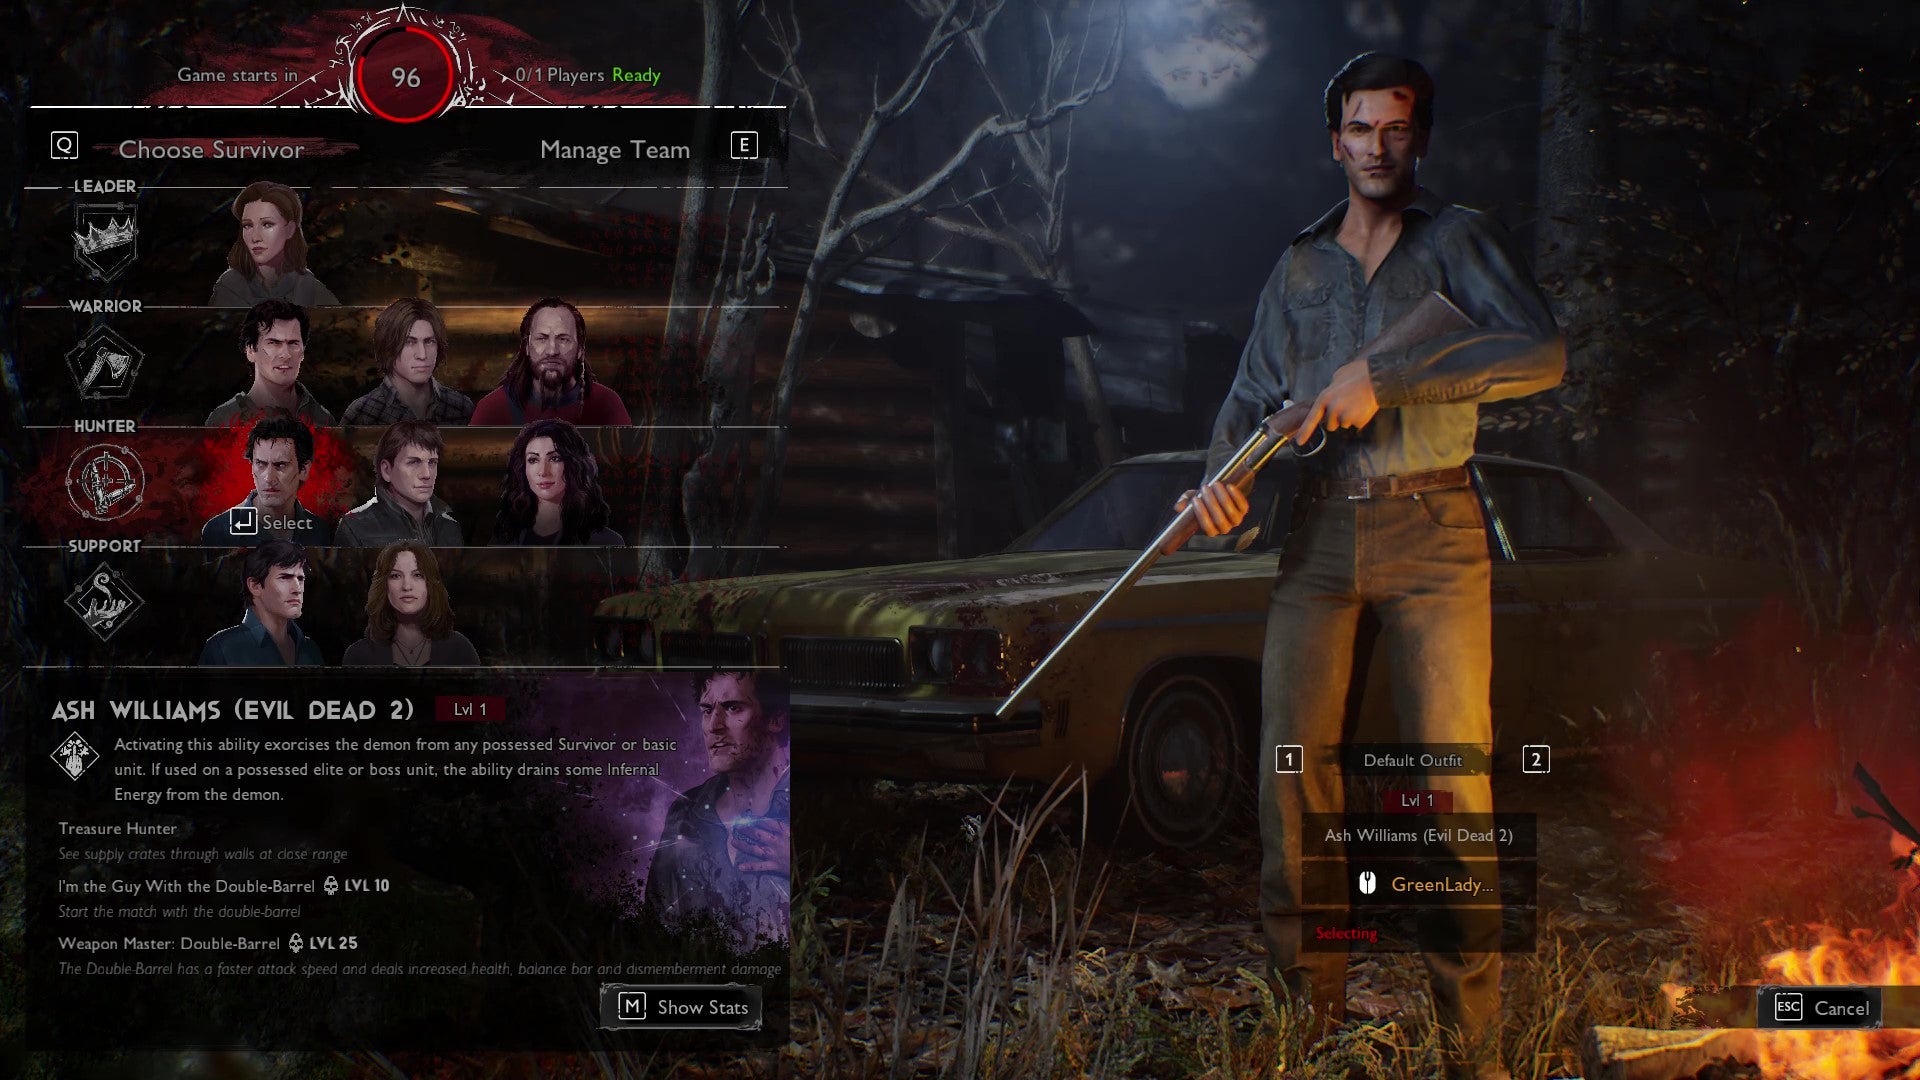 The player selection screen from Evil Dead: The Game, with Ash Williams (Evil Dead 2) selected by a Survivor player.